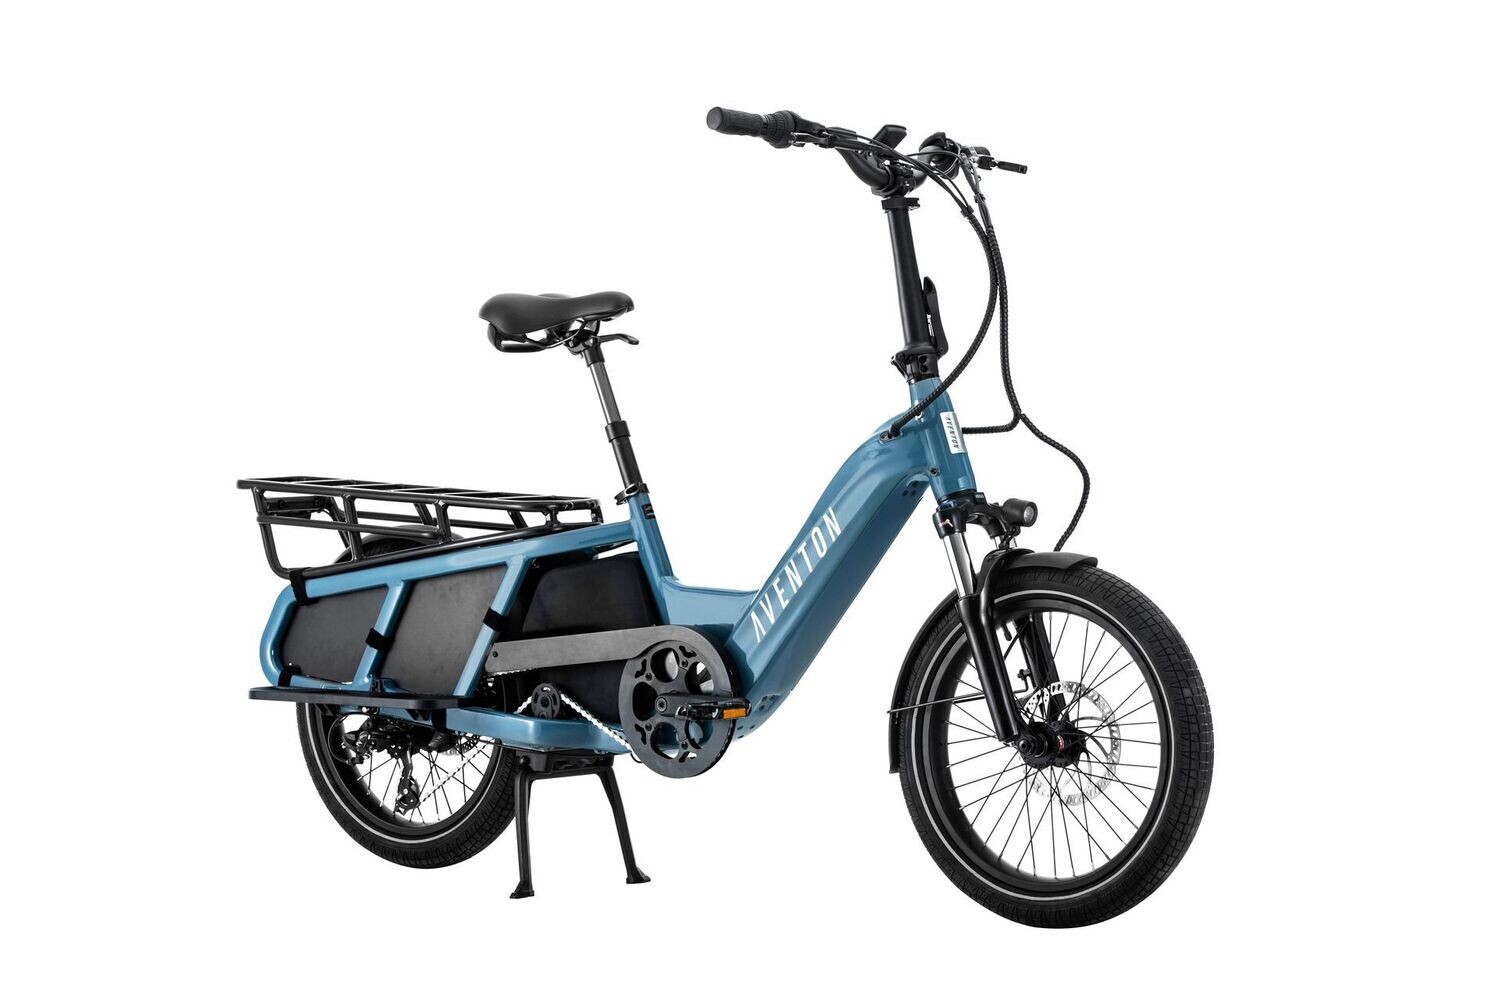 Aventon Abound E-Bike Review: A Powerful and Feature-Rich Cargo Hauler